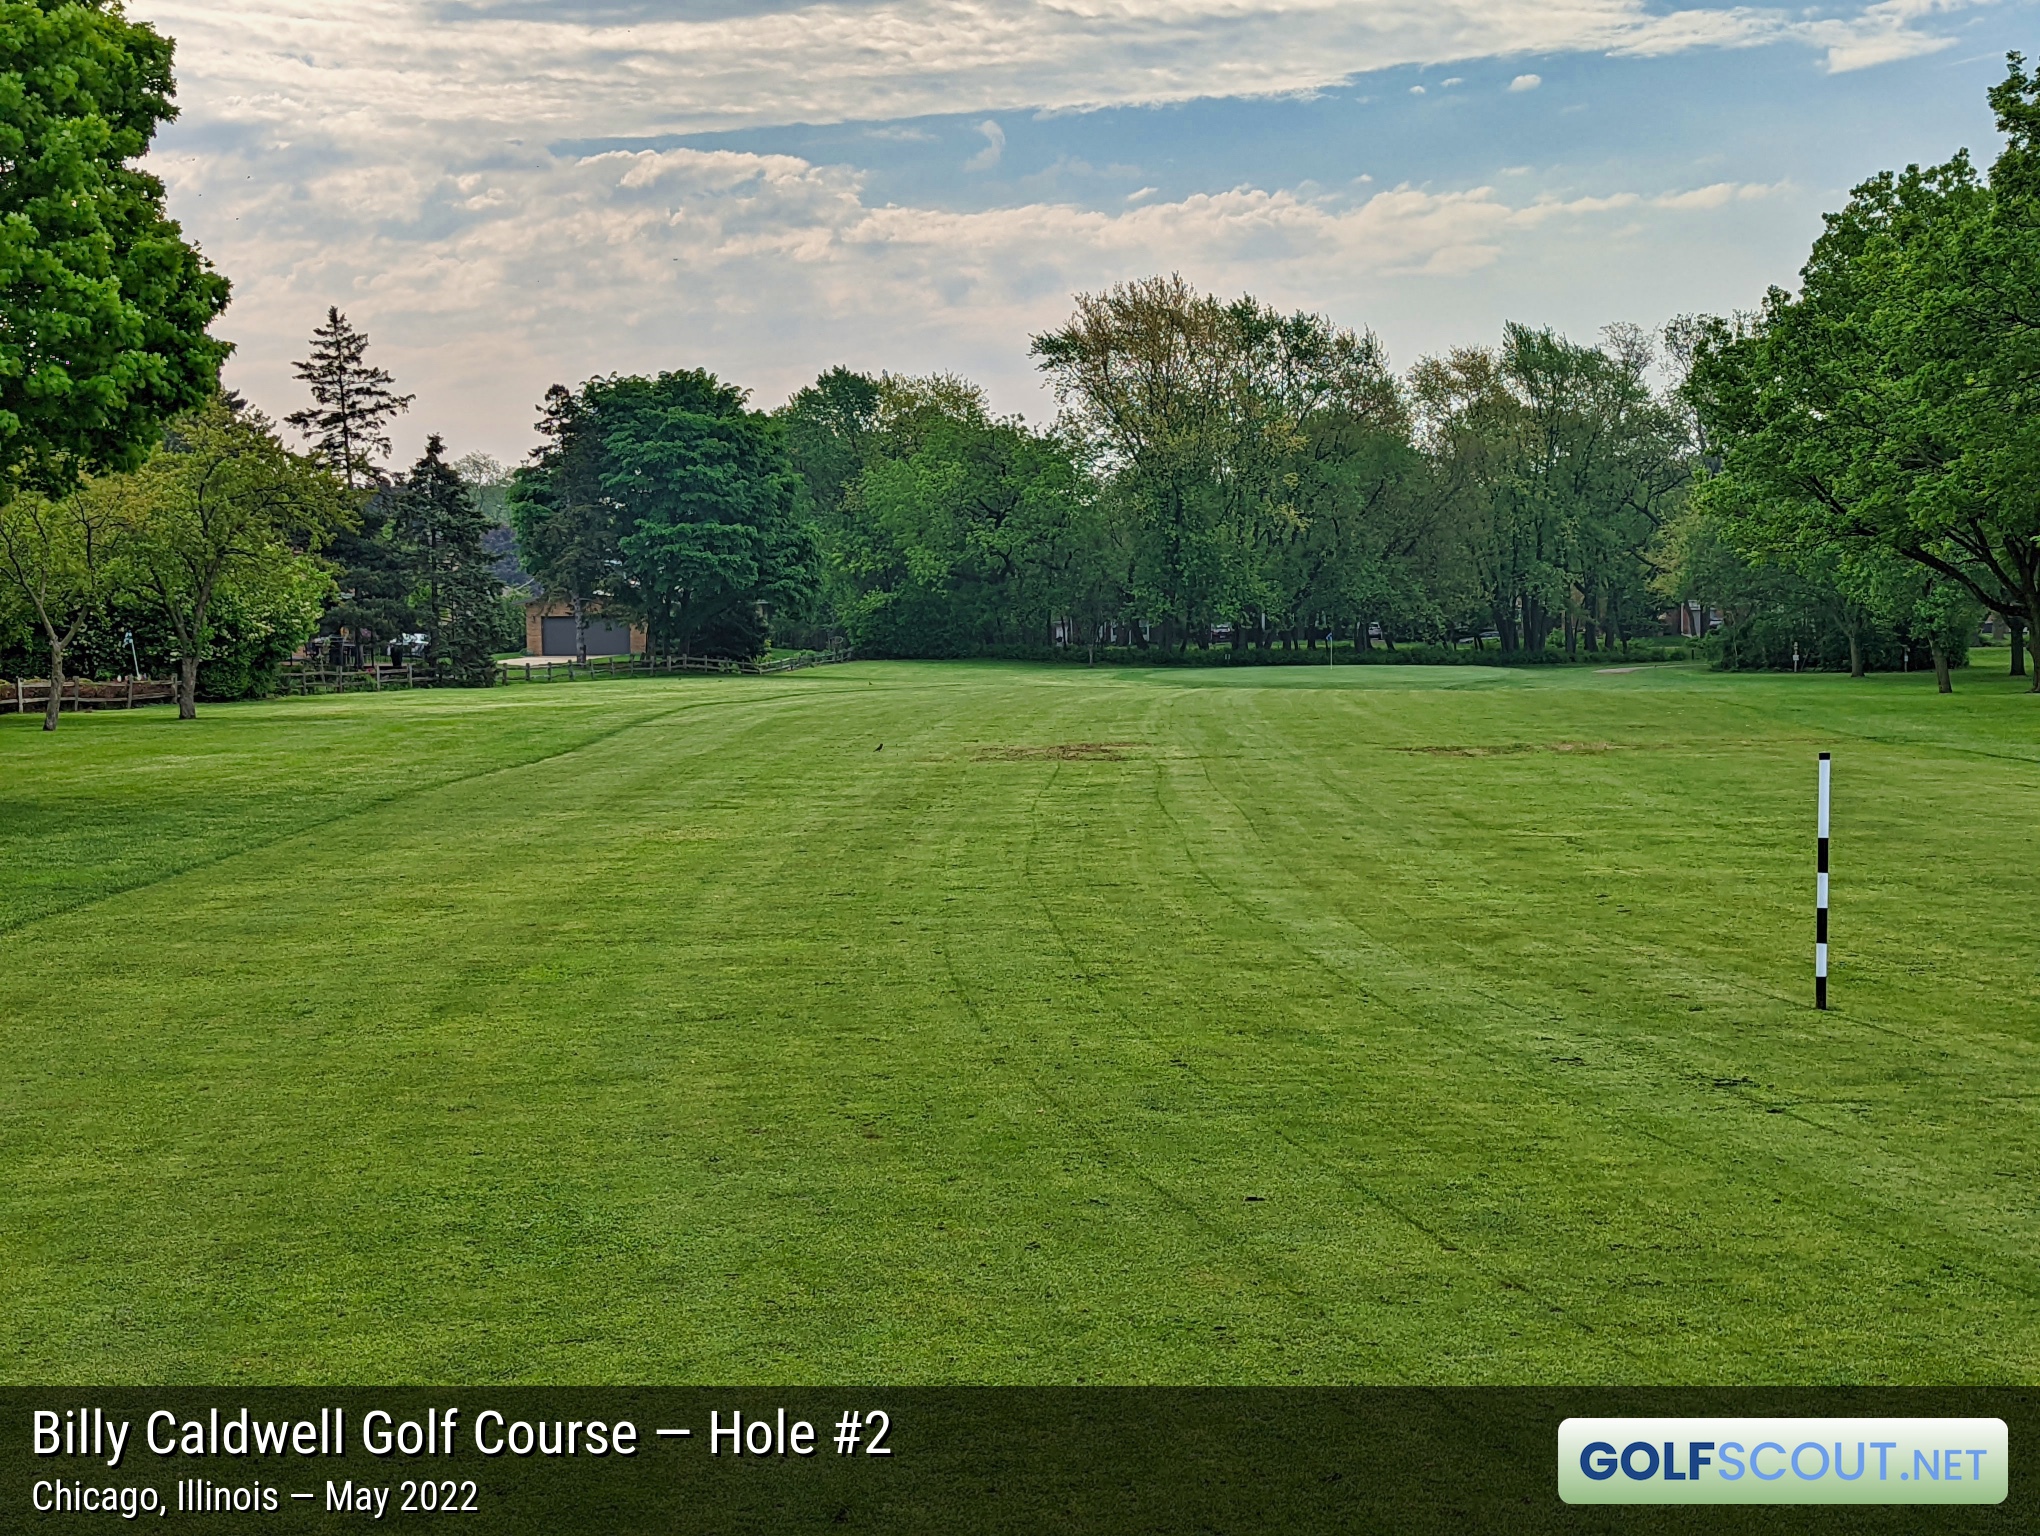 Photo of hole #2 at Billy Caldwell Golf Course in Chicago, Illinois. 